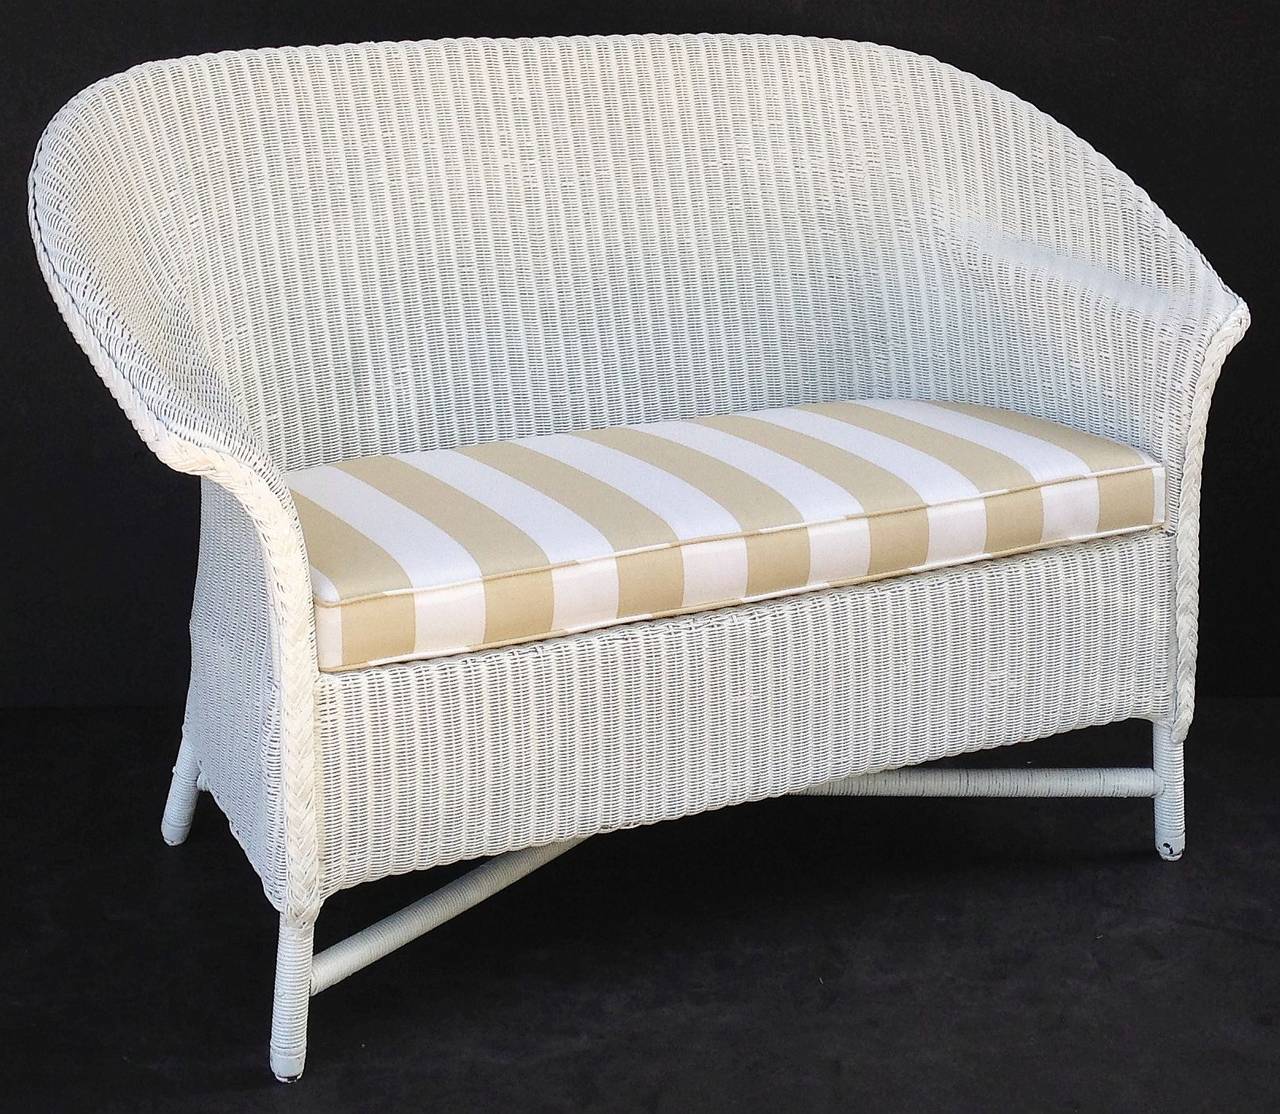 A Lloyd Loom sofa, synonymous with Classic English style.

Perfect for the garden room or conservatory, this handsome sofa features the vintage look and comfort one only finds in the original, pre-War series. A flowing, serpentine back of woven